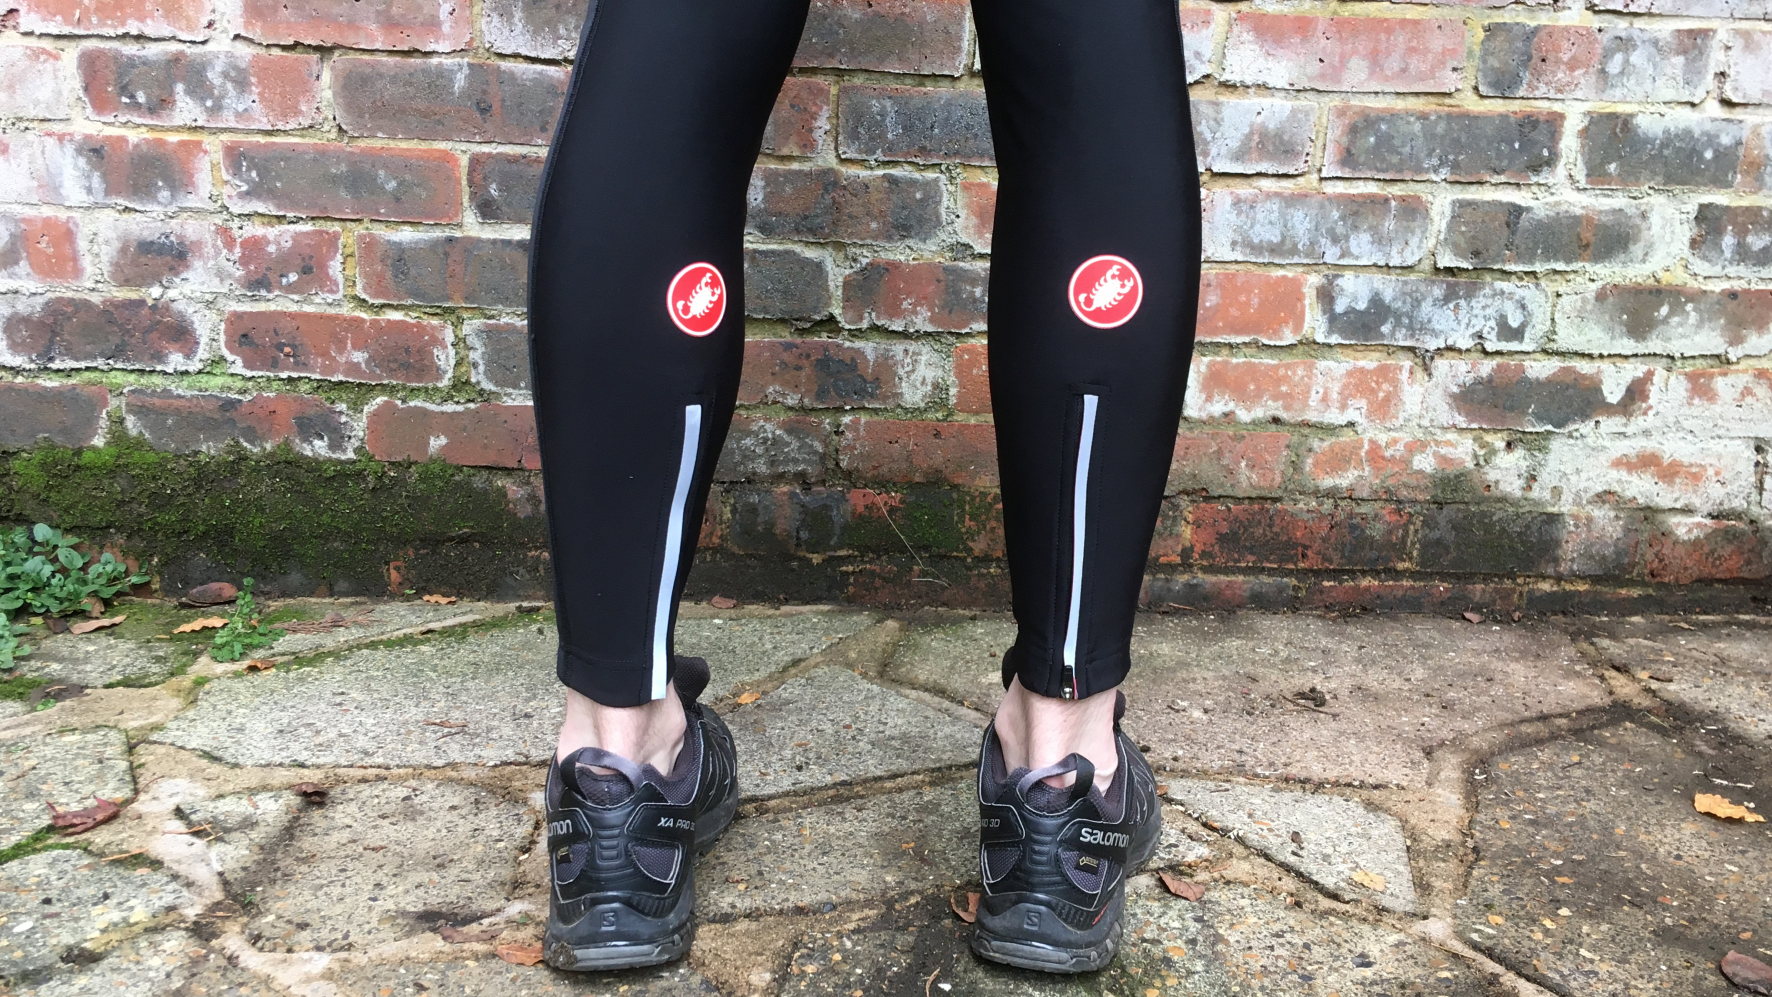 Image shows a rider wearing the Castelli Entrata Wind Bib Tights.